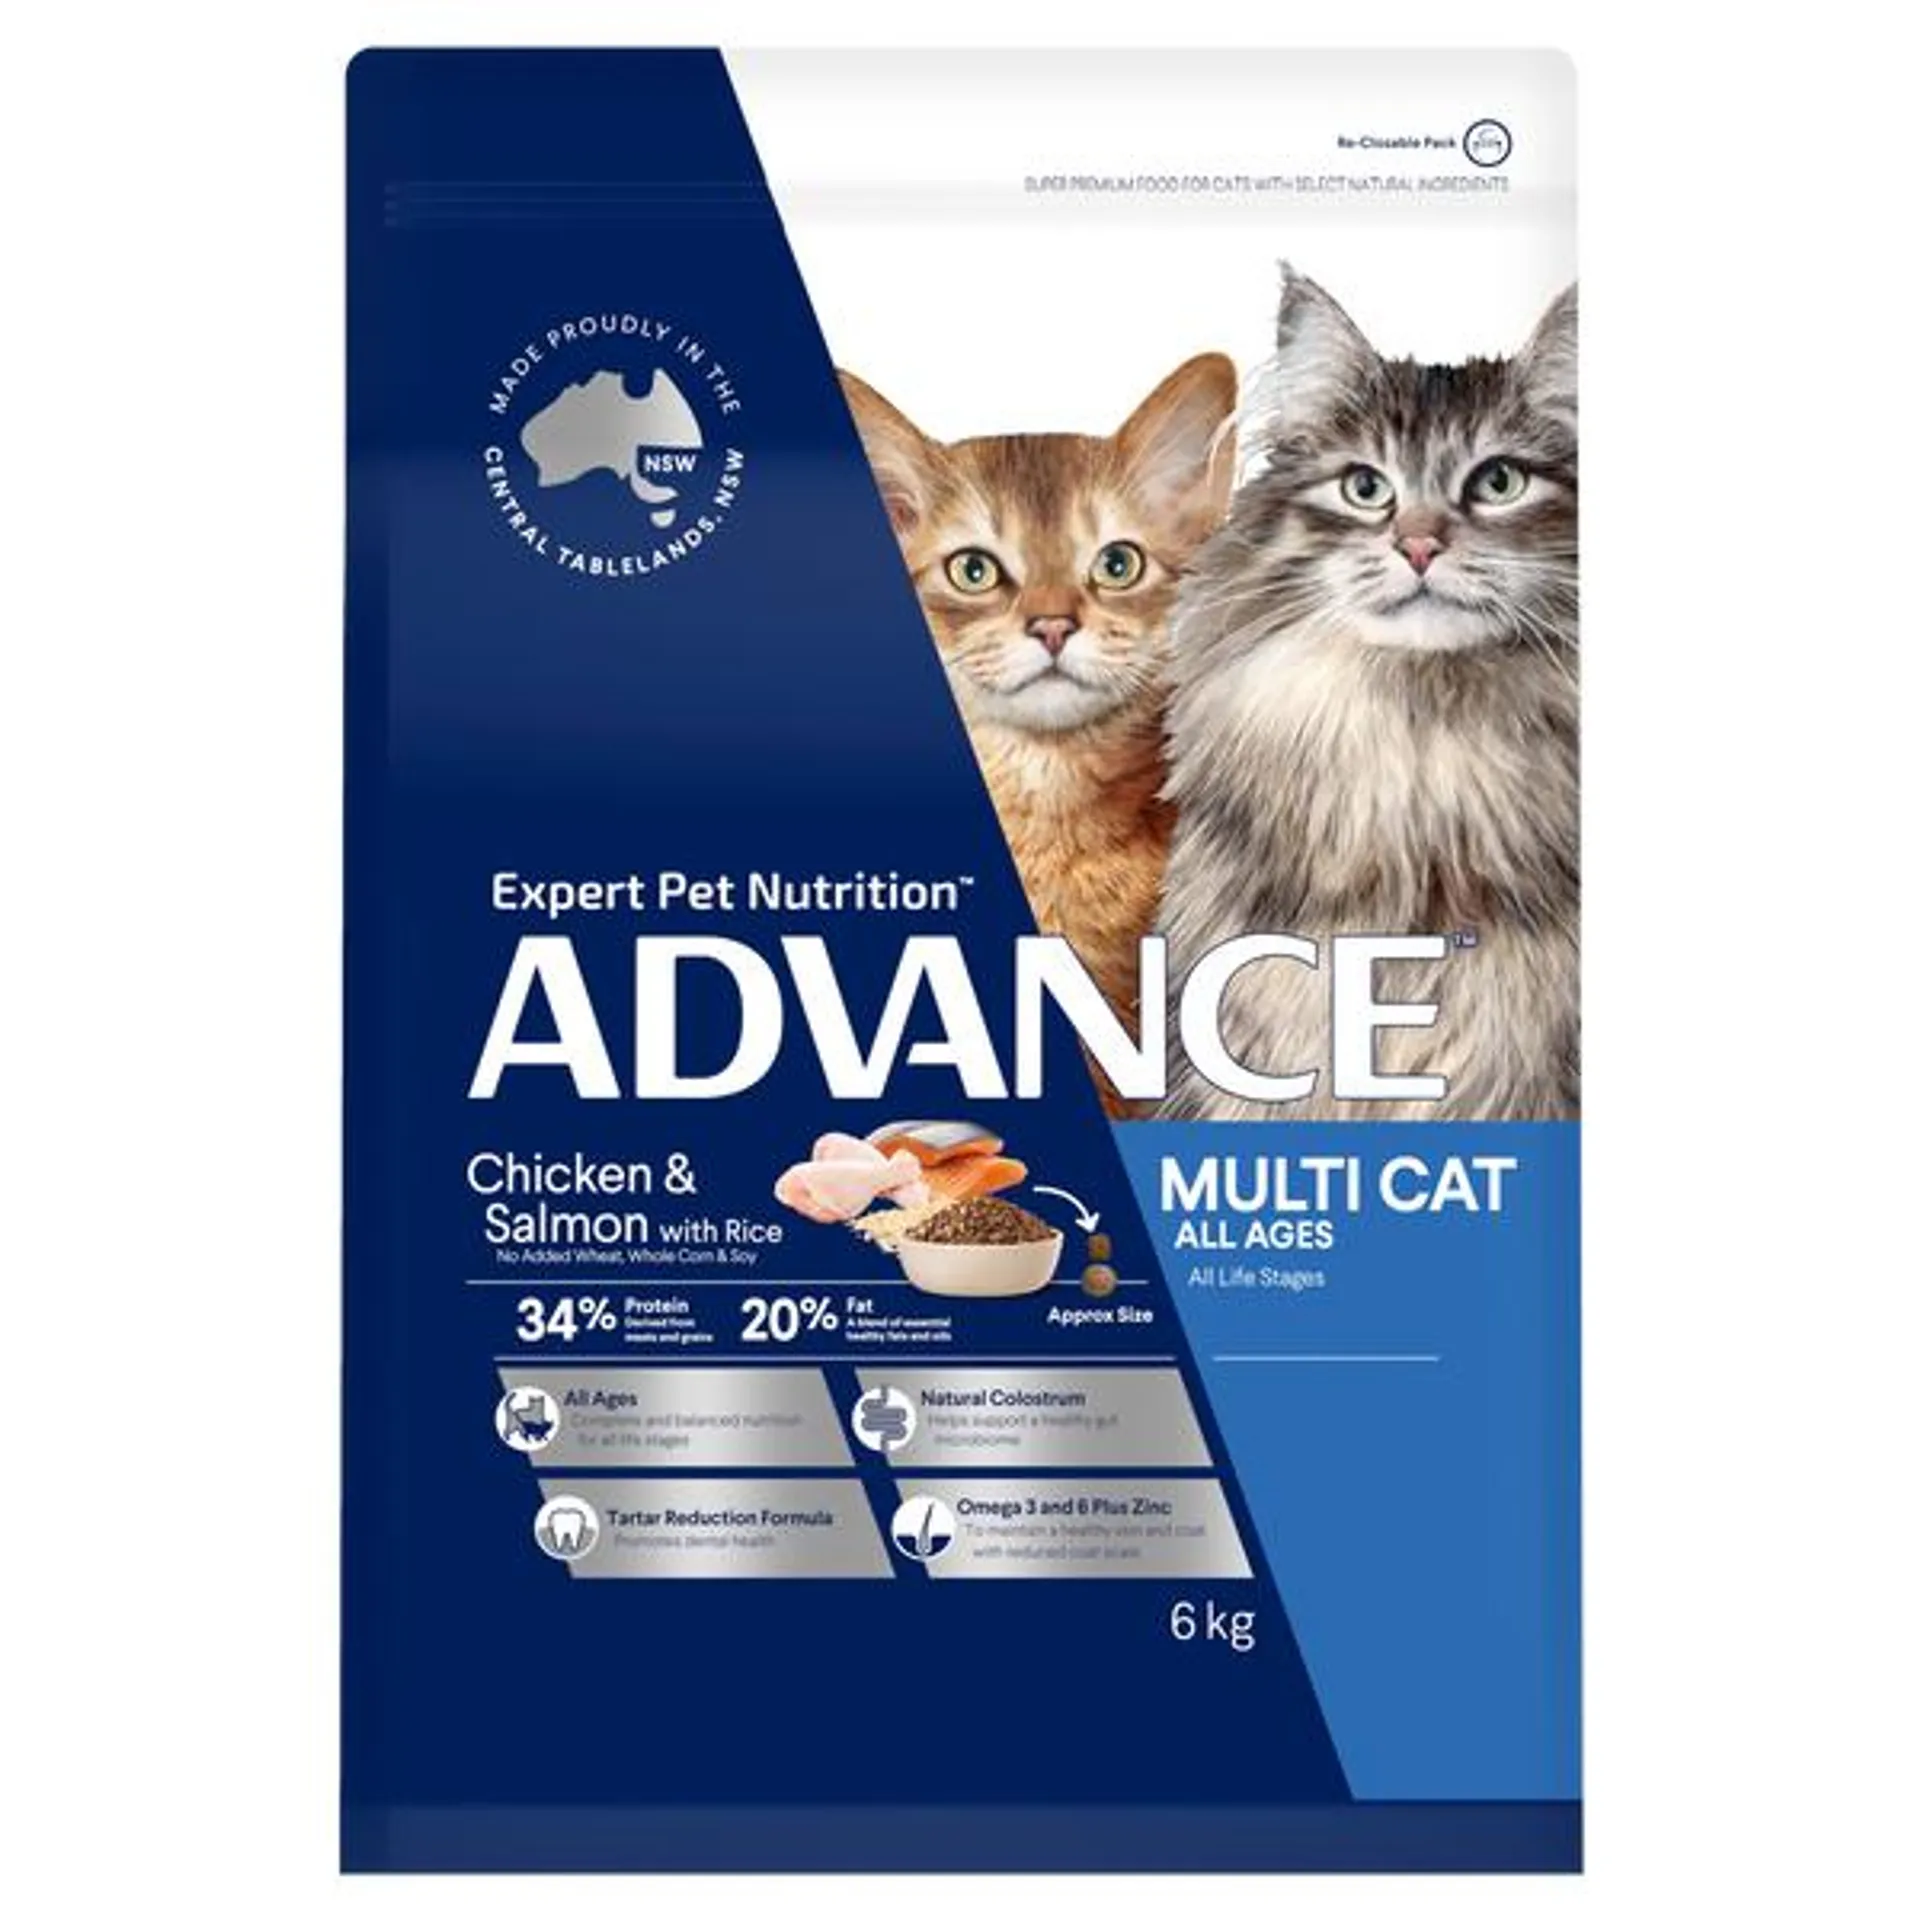 ADVANCE - Multi Cat Chicken & Salmon with Rice Dry Cat Food (6kg)